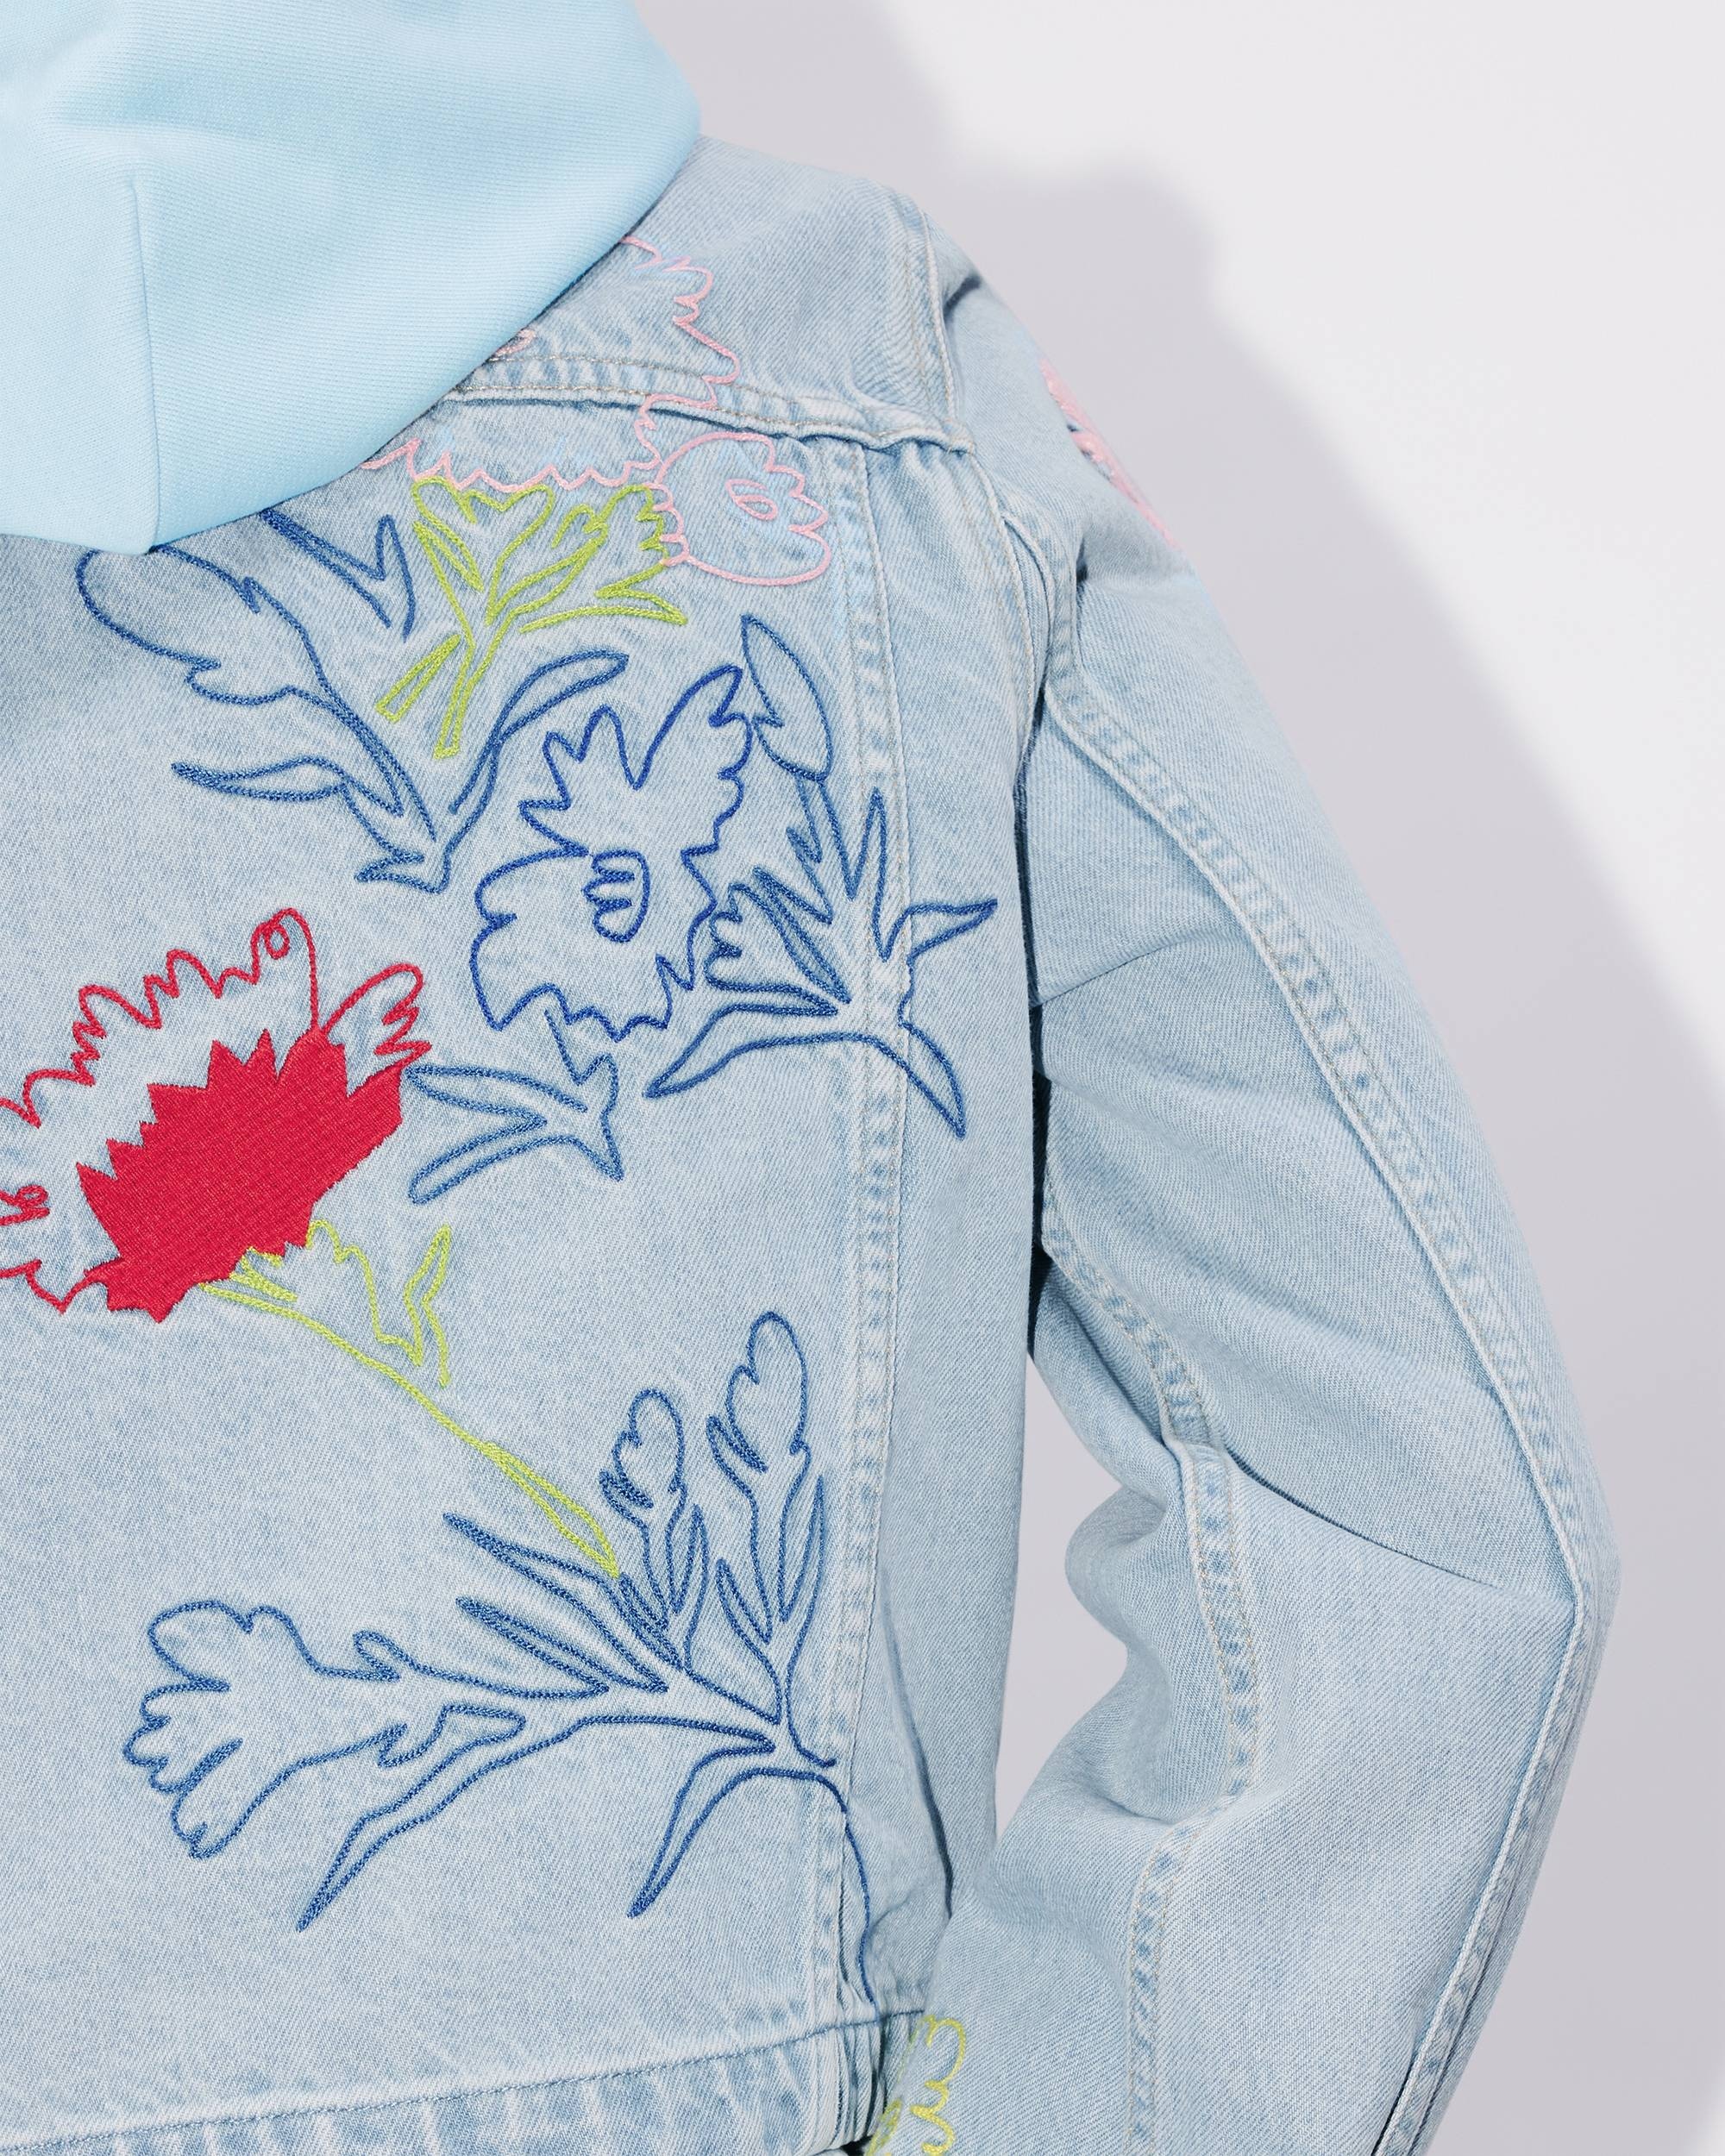 'KENZO Drawn Flowers' embroidered trucker jacket - 8